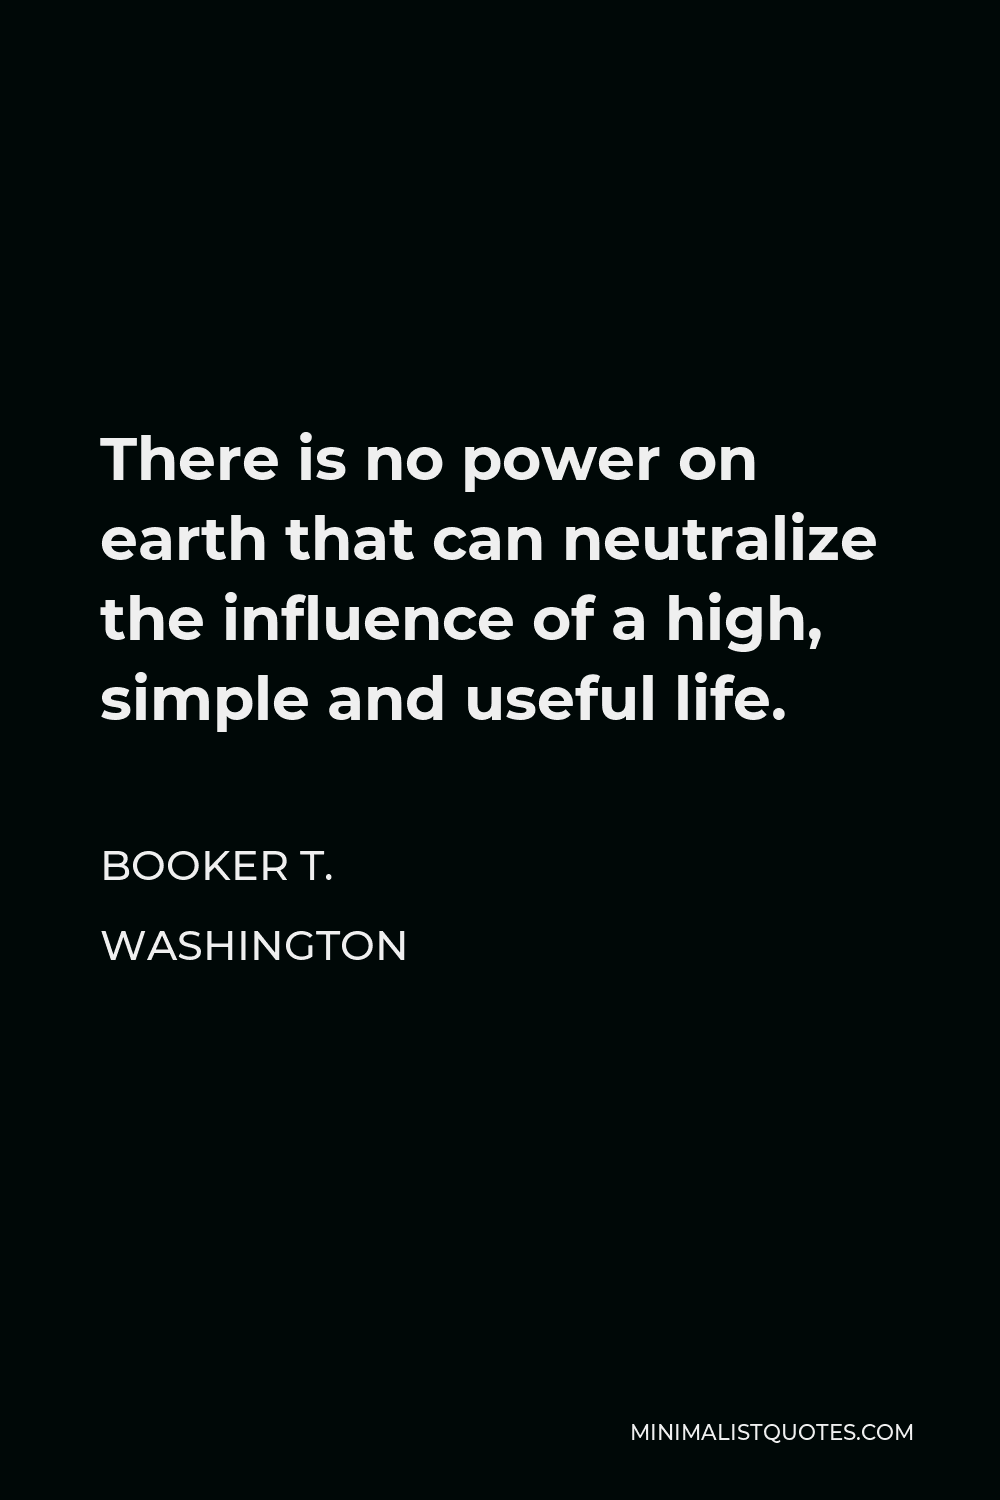 Booker T. Washington Quote - There is no power on earth that can neutralize the influence of a high, simple and useful life.